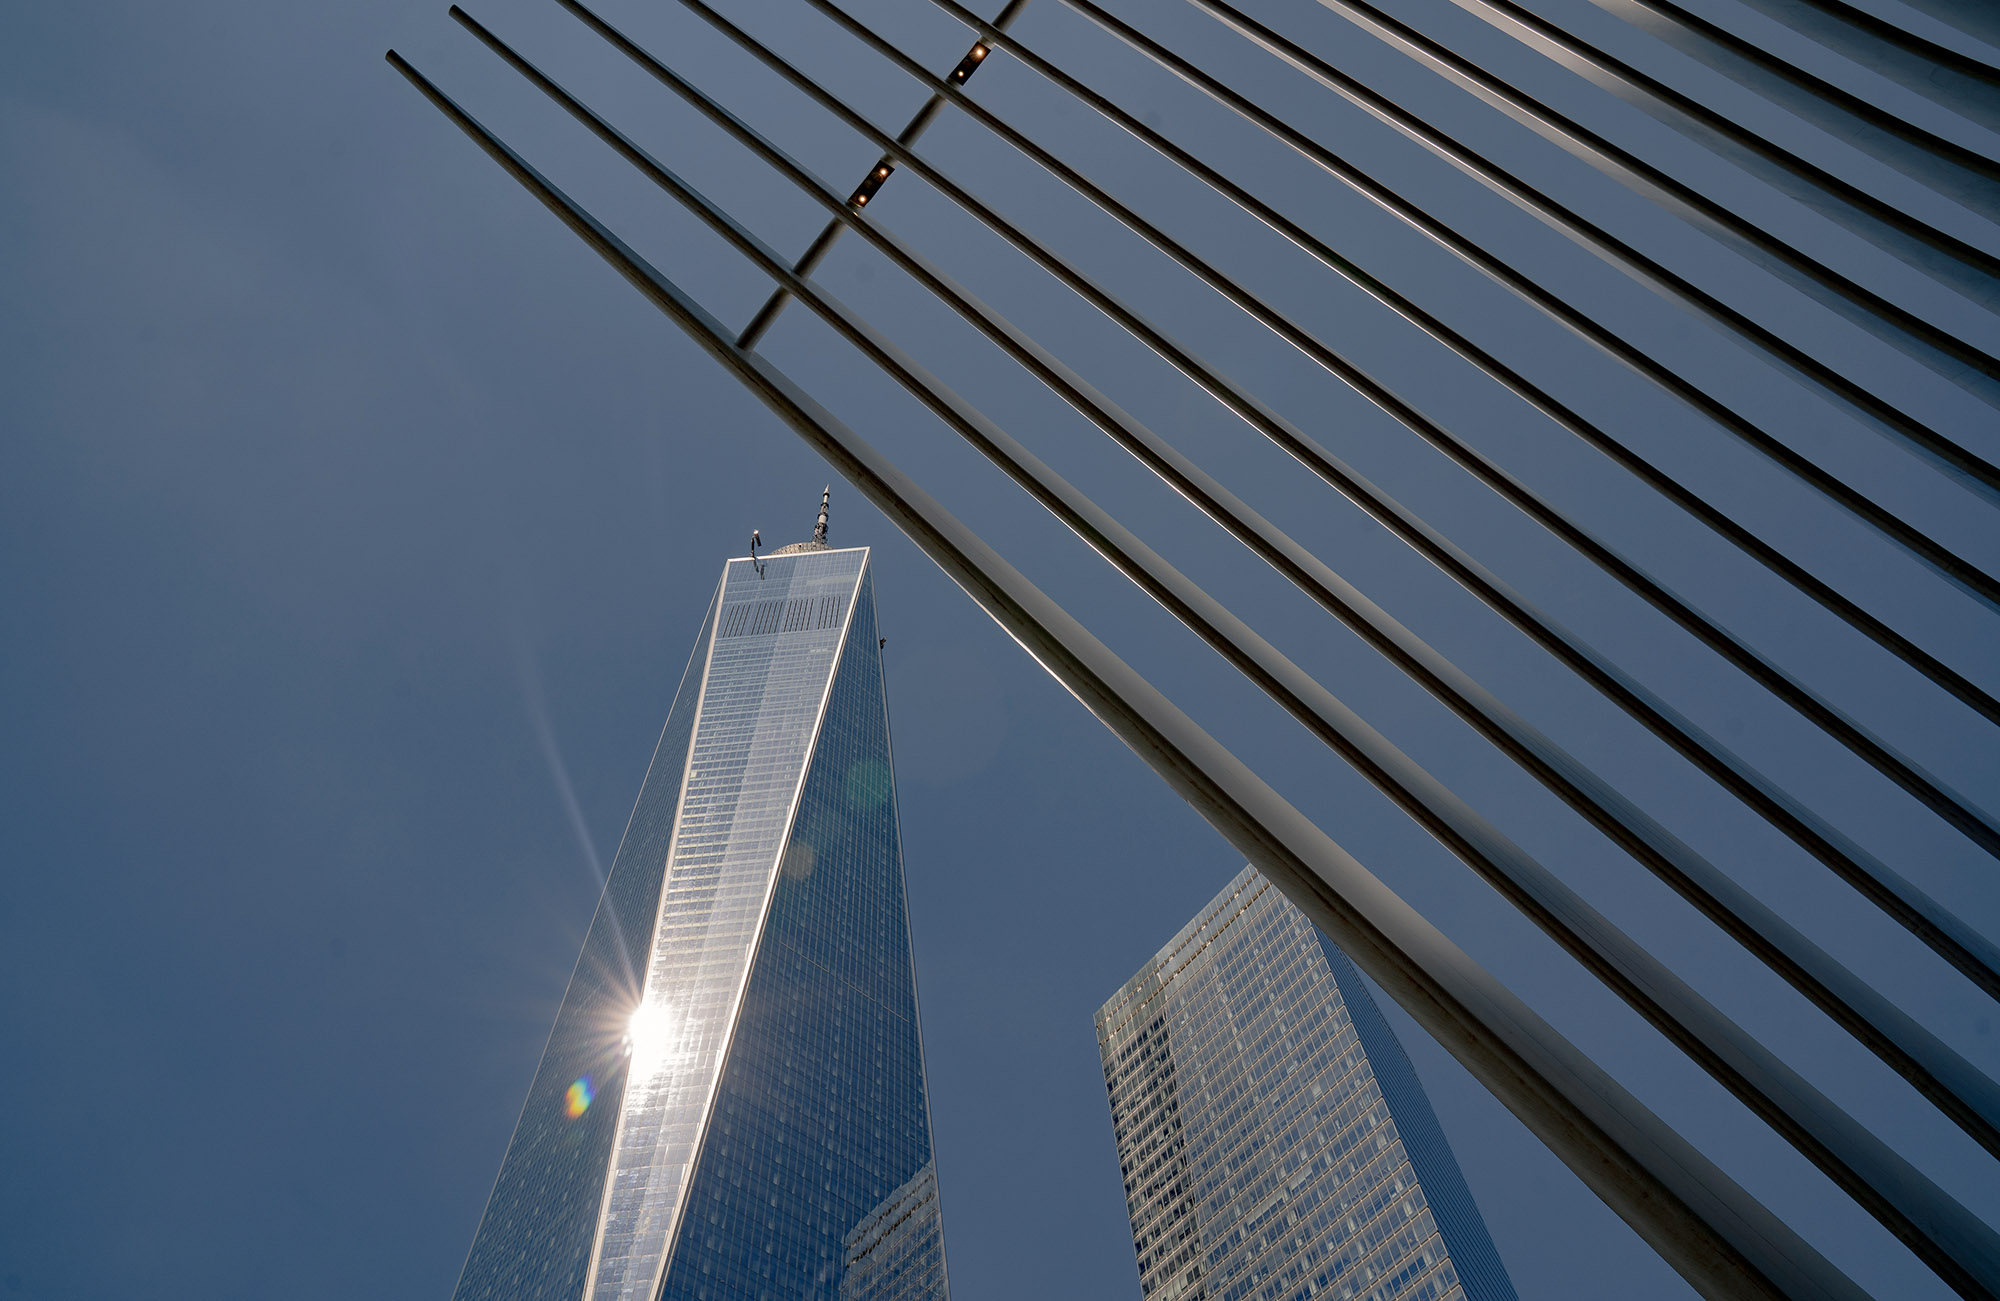 N.Y. Plans $700 Million Refinancing of One World Trade Center - Bloomberg